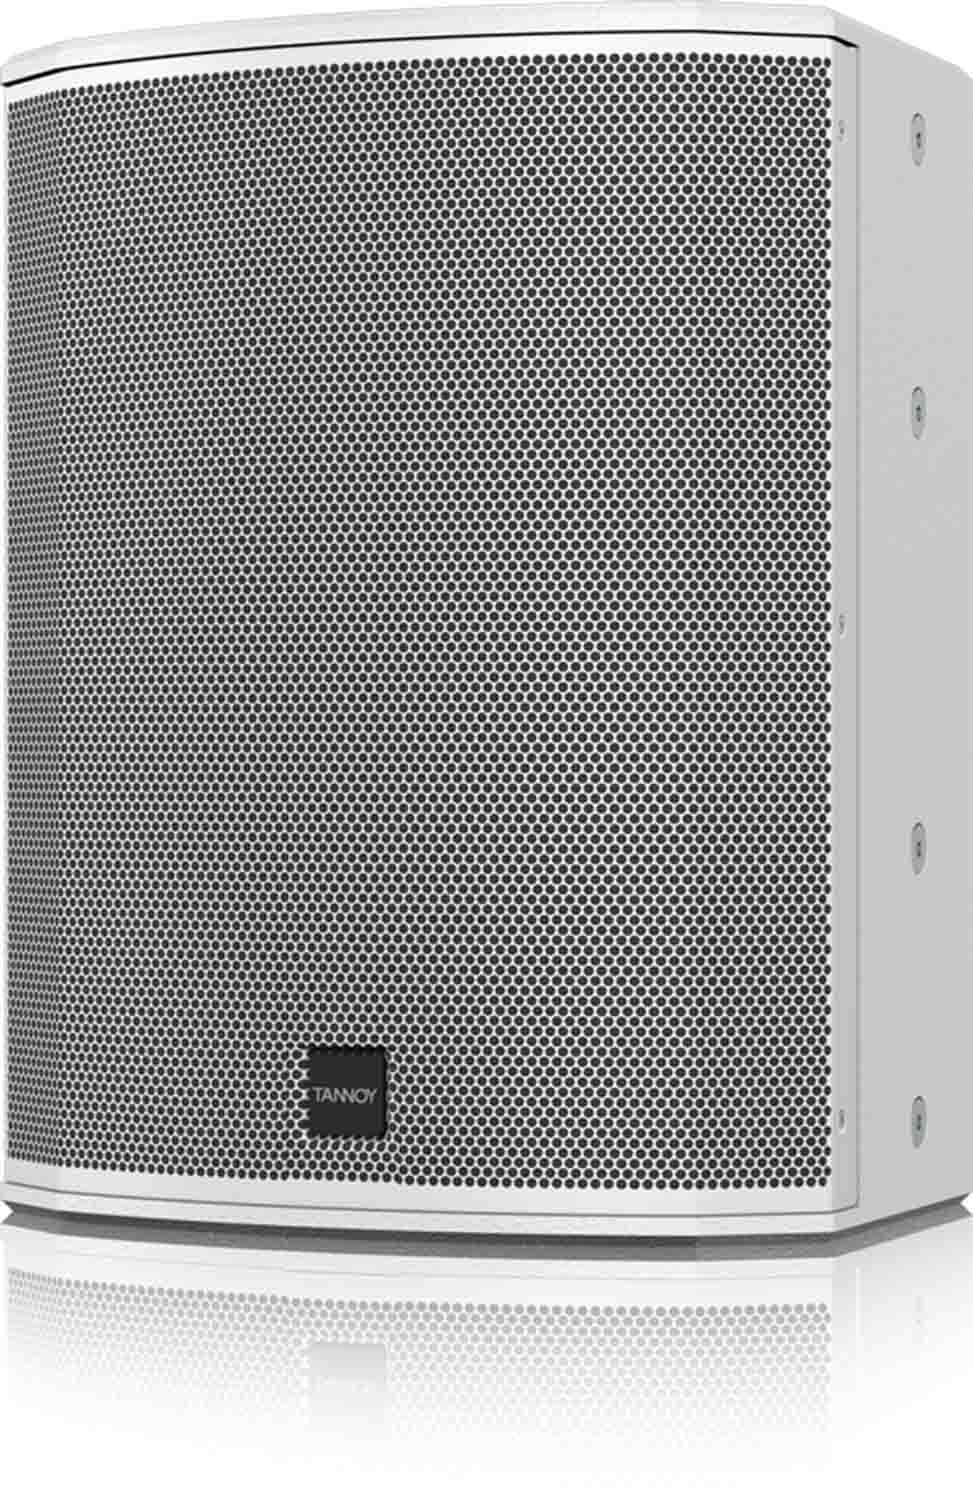 Tannoy VX 12Q-WH 12 Inches Power Dual Full Range Loudspeaker with Q-Centric Waveguide – White - Hollywood DJ